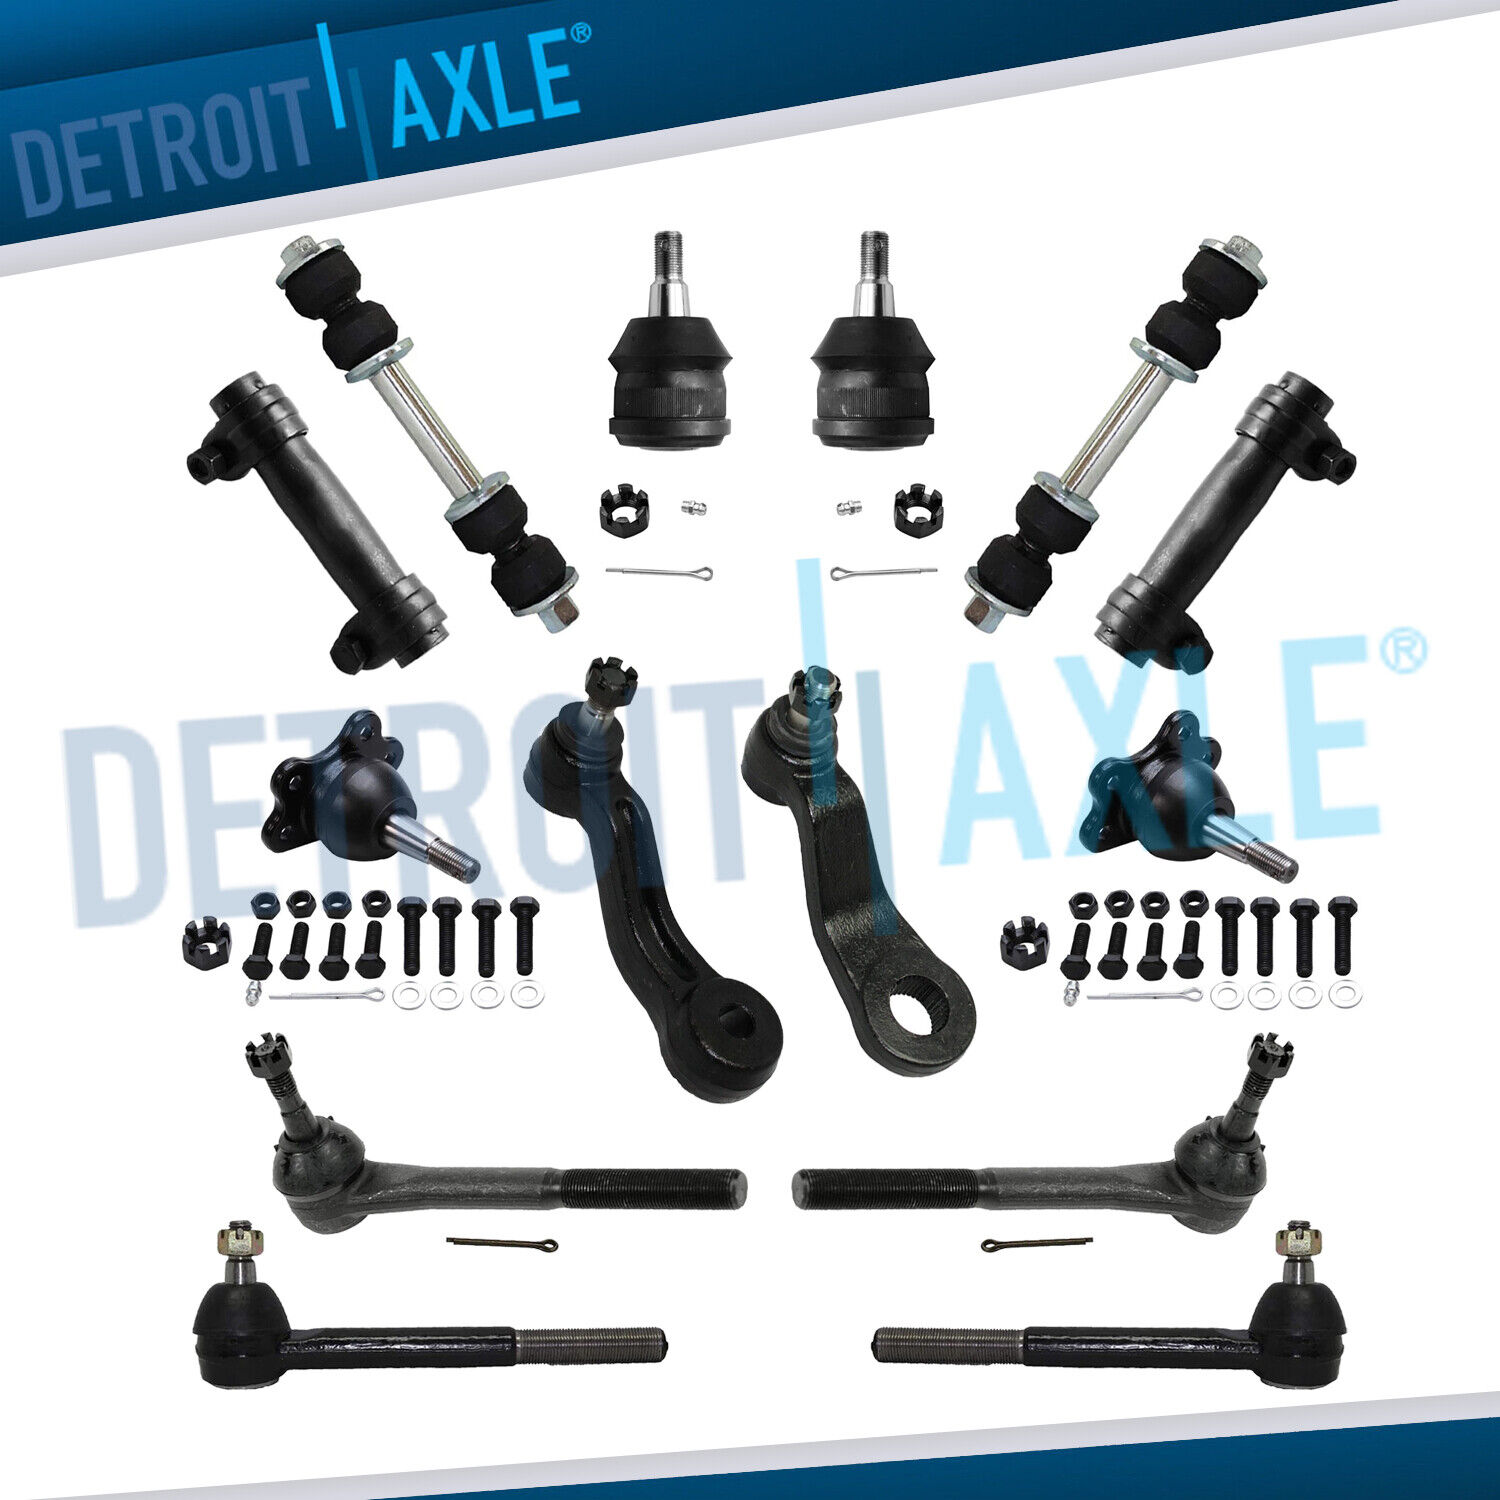 New 14pc Front Suspension Kit for Chevy and GMC Trucks - 2WD ONLY - 7200 GVW